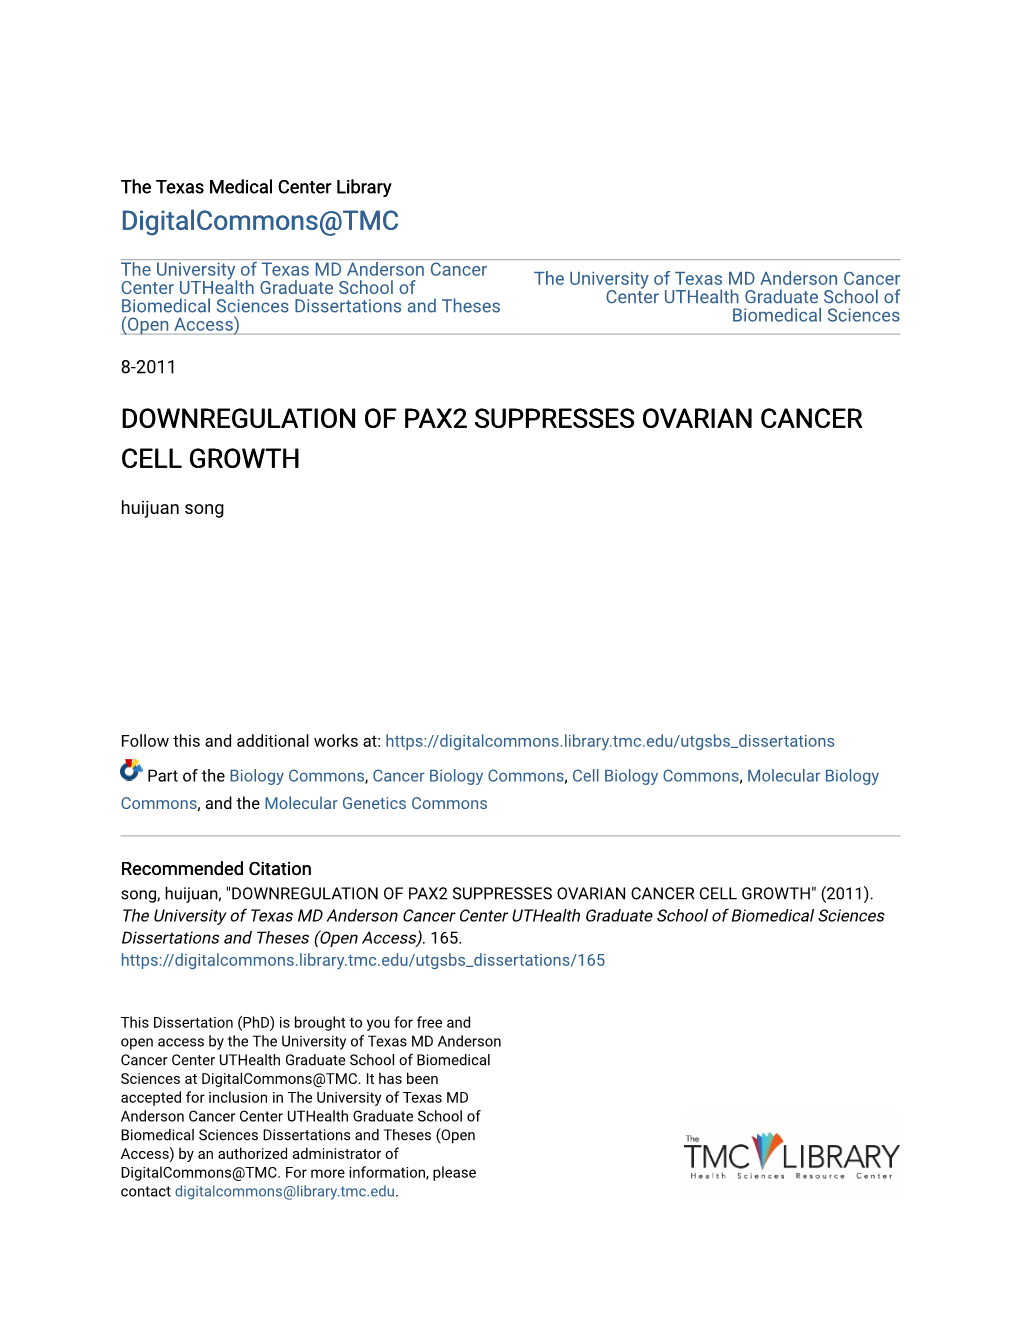 DOWNREGULATION of PAX2 SUPPRESSES OVARIAN CANCER CELL GROWTH Huijuan Song